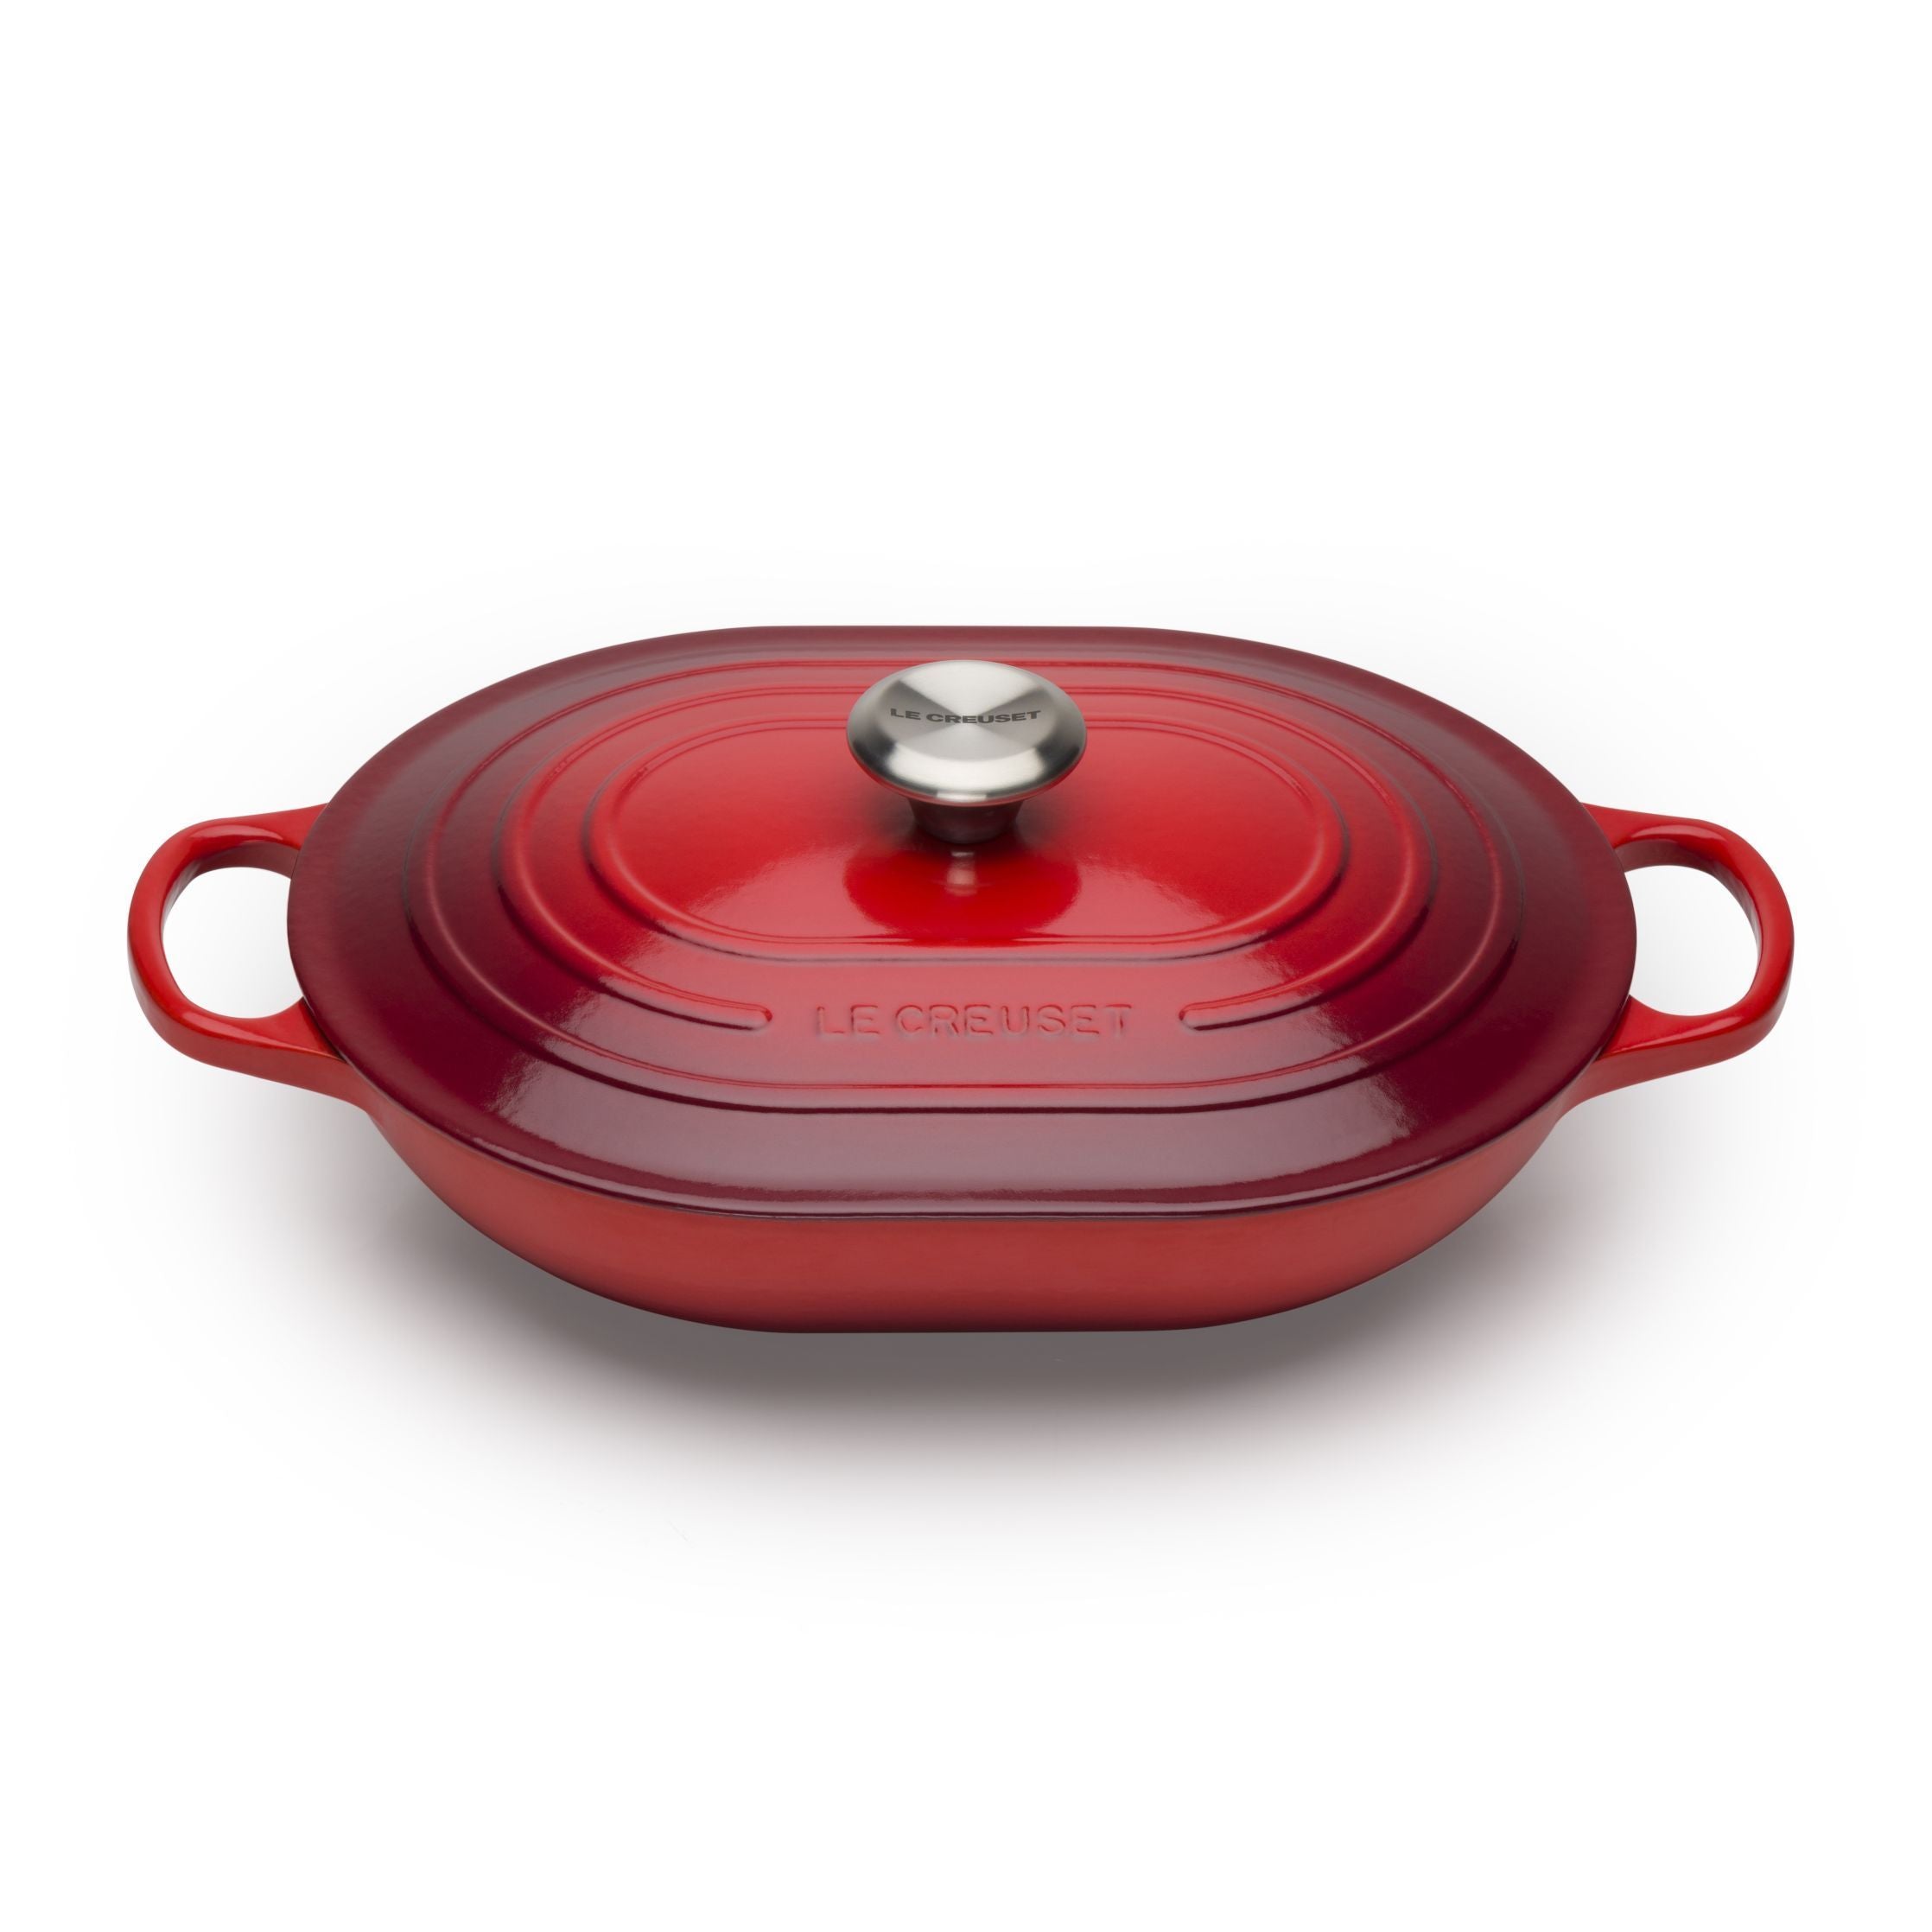 Le Creuset Nature Oblong Toaster 3,4 L, Cherry Red